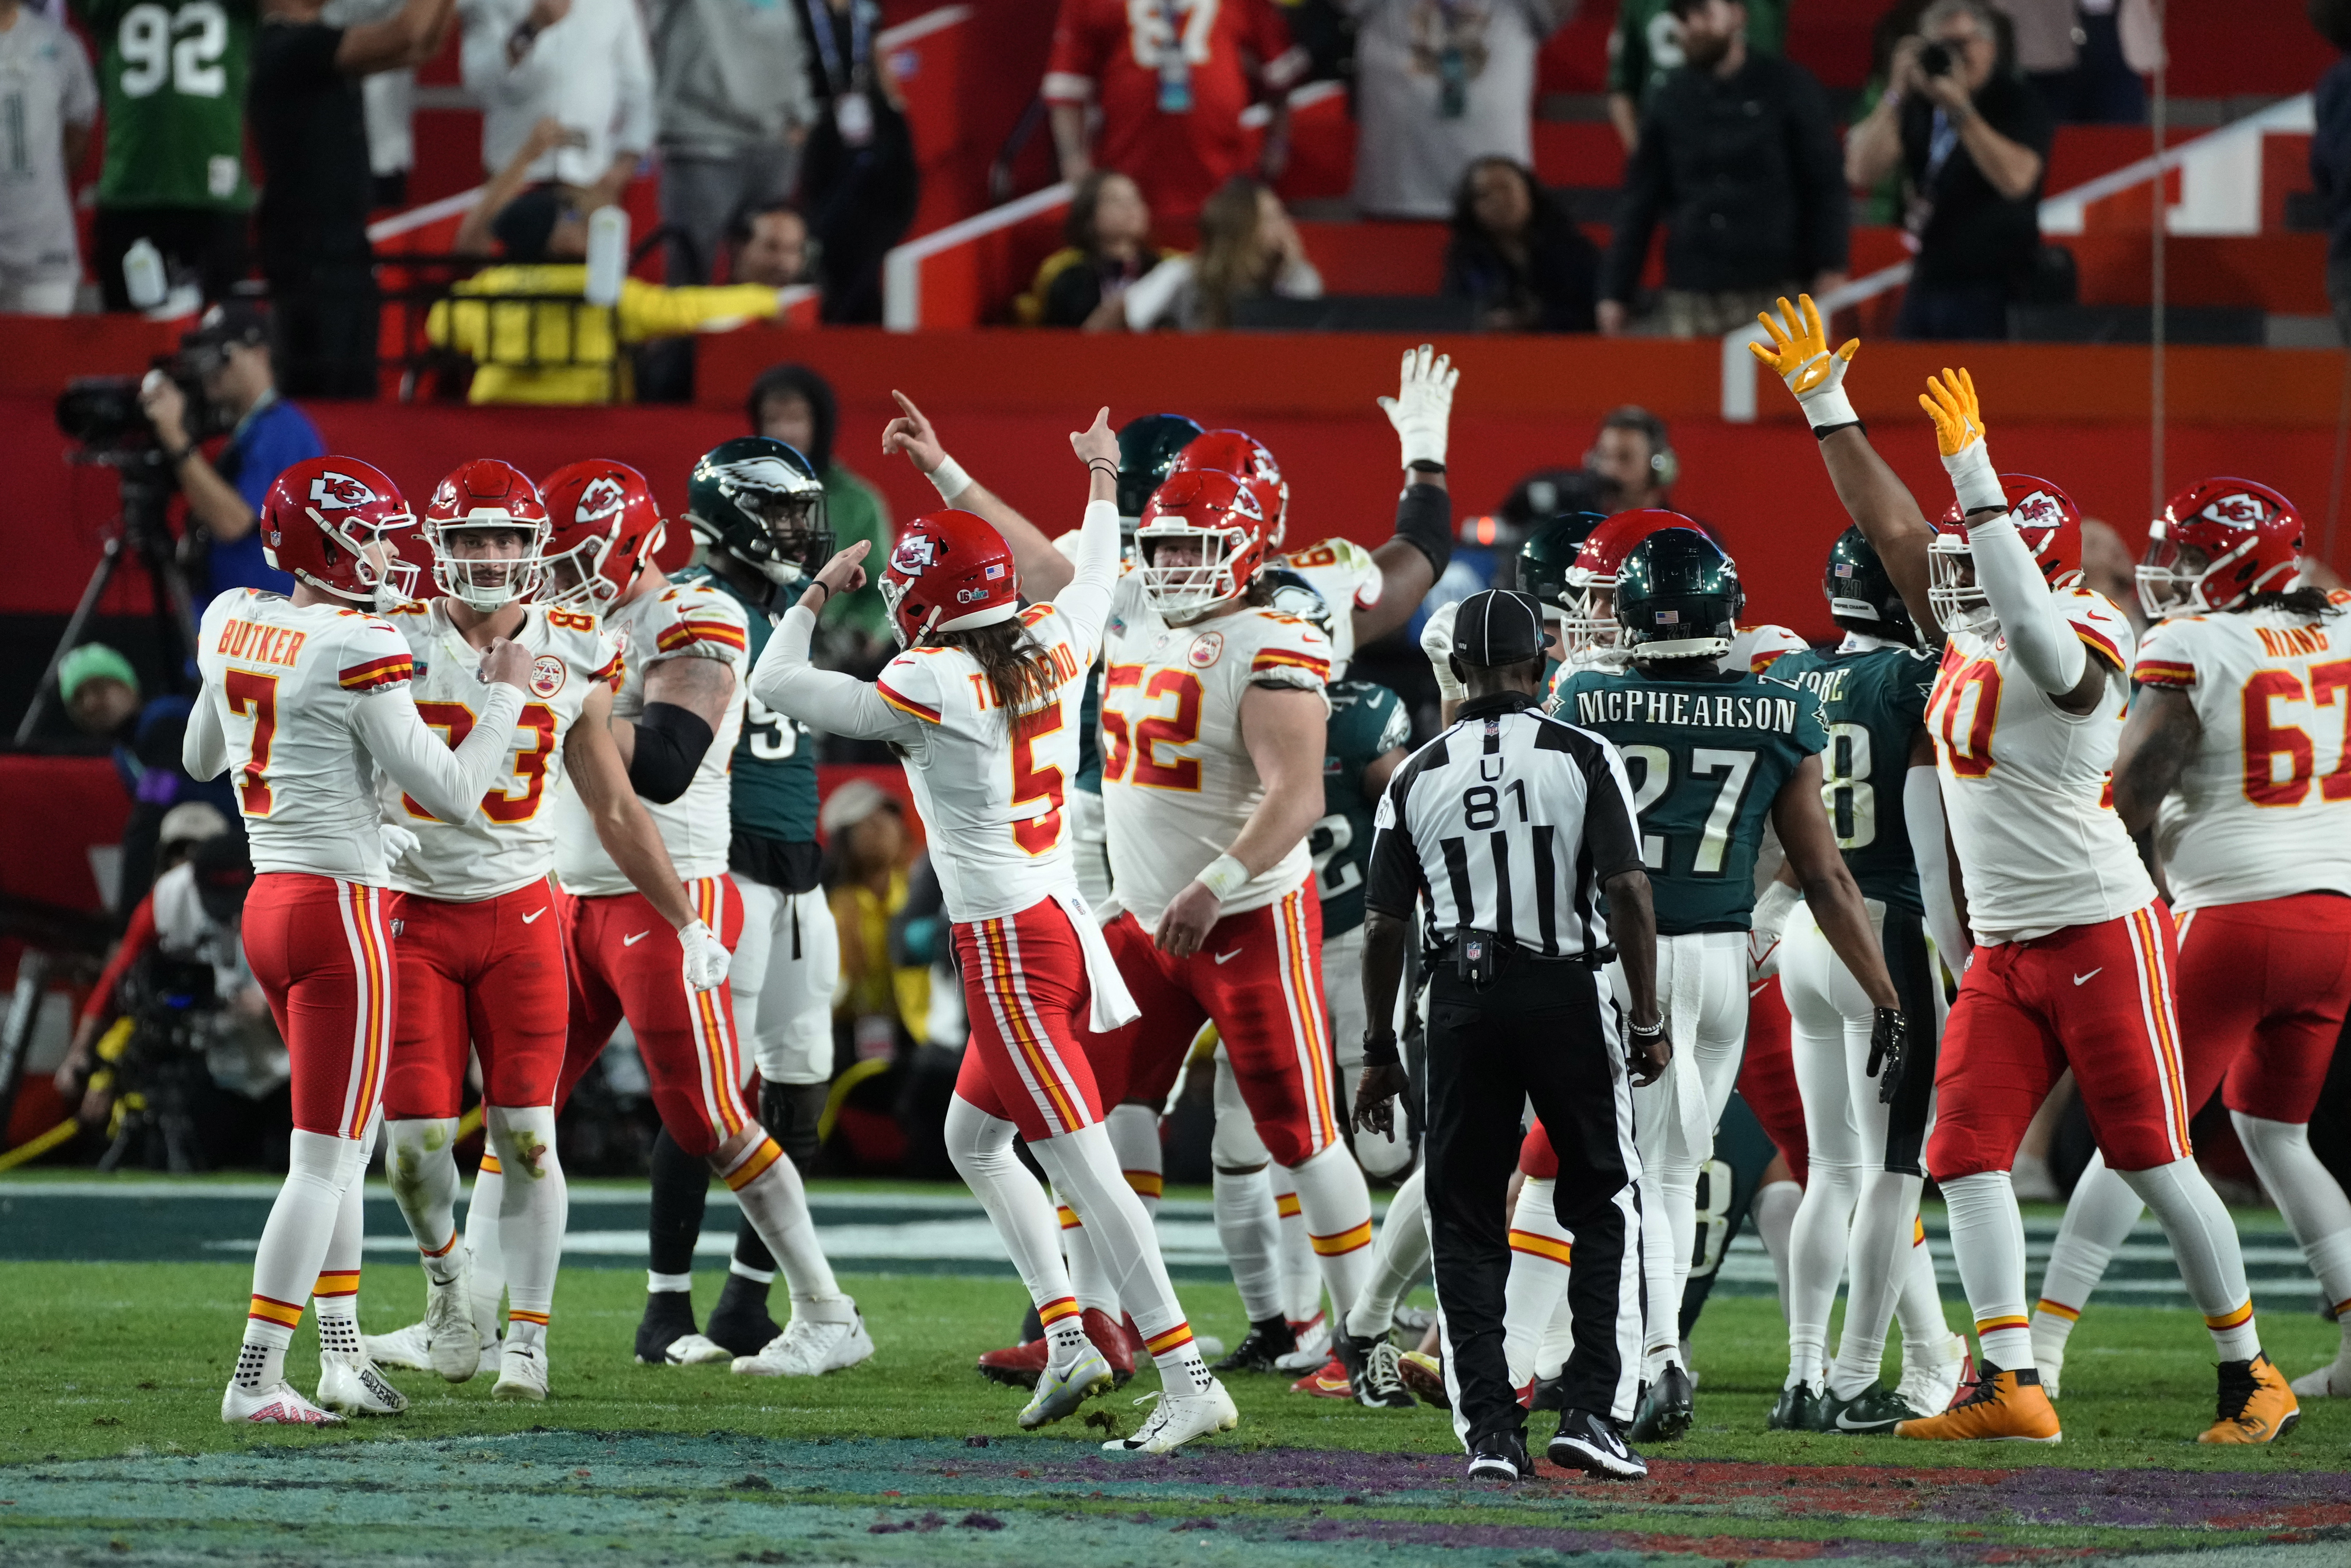 Chiefs stage second-half comeback to beat Eagles 38-35 in Super